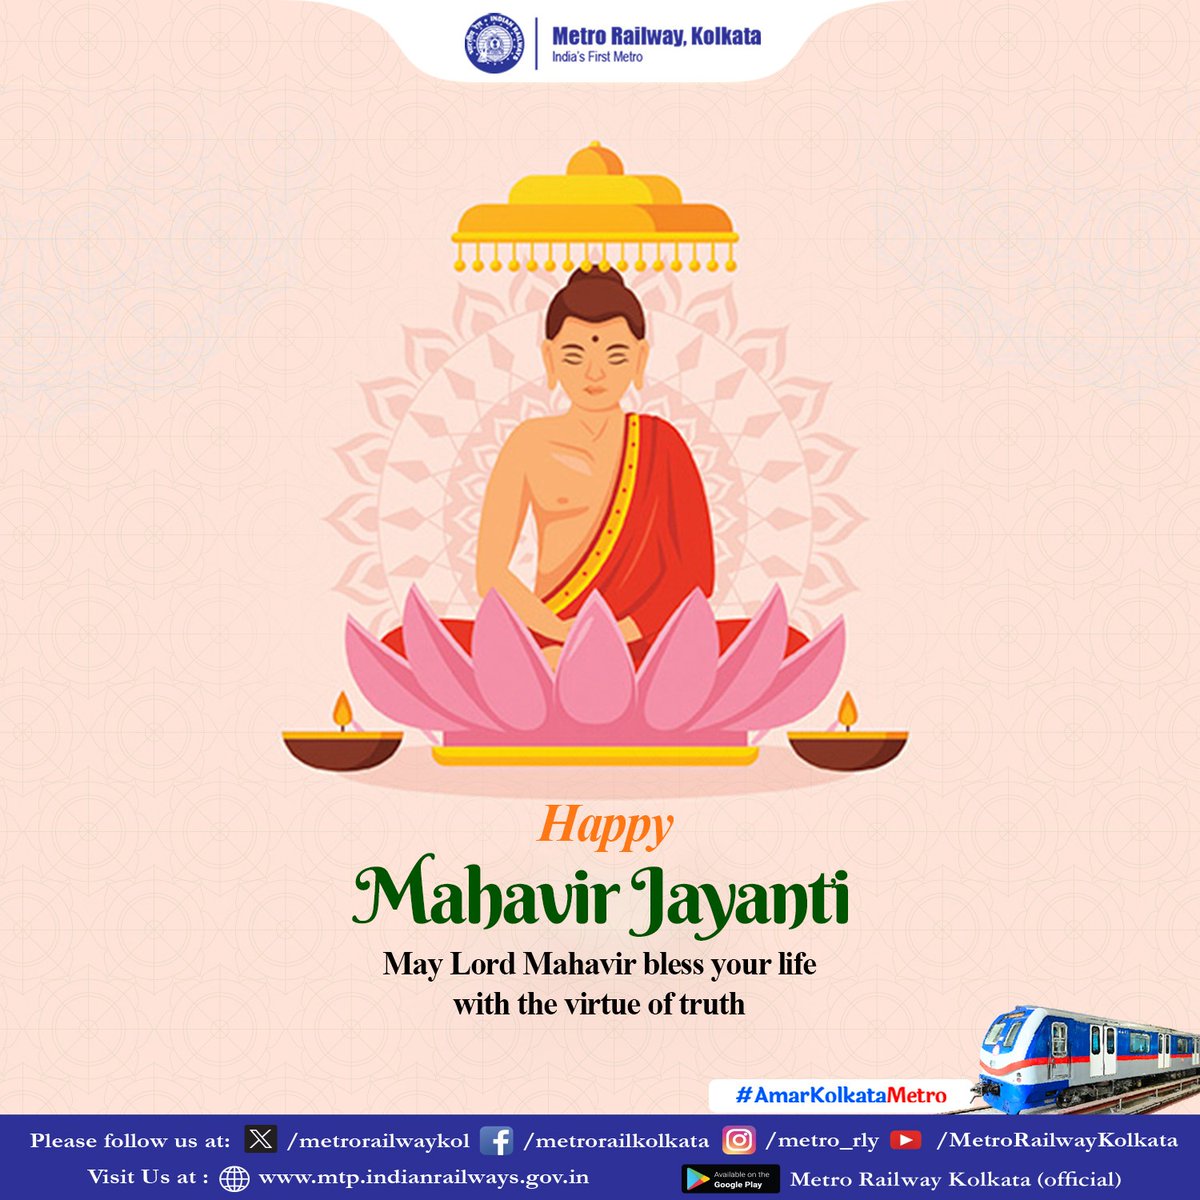 May the holy words show you the path to never ending happiness. Sending you warm wishes on this auspicious day. Happy Mahavir Jayanti. #mahavirjayanti #mahavir #jaintemple #jaijinendra #mahavira #parshwanath #bhakti #india #mahaveer #adinath #jaindharam